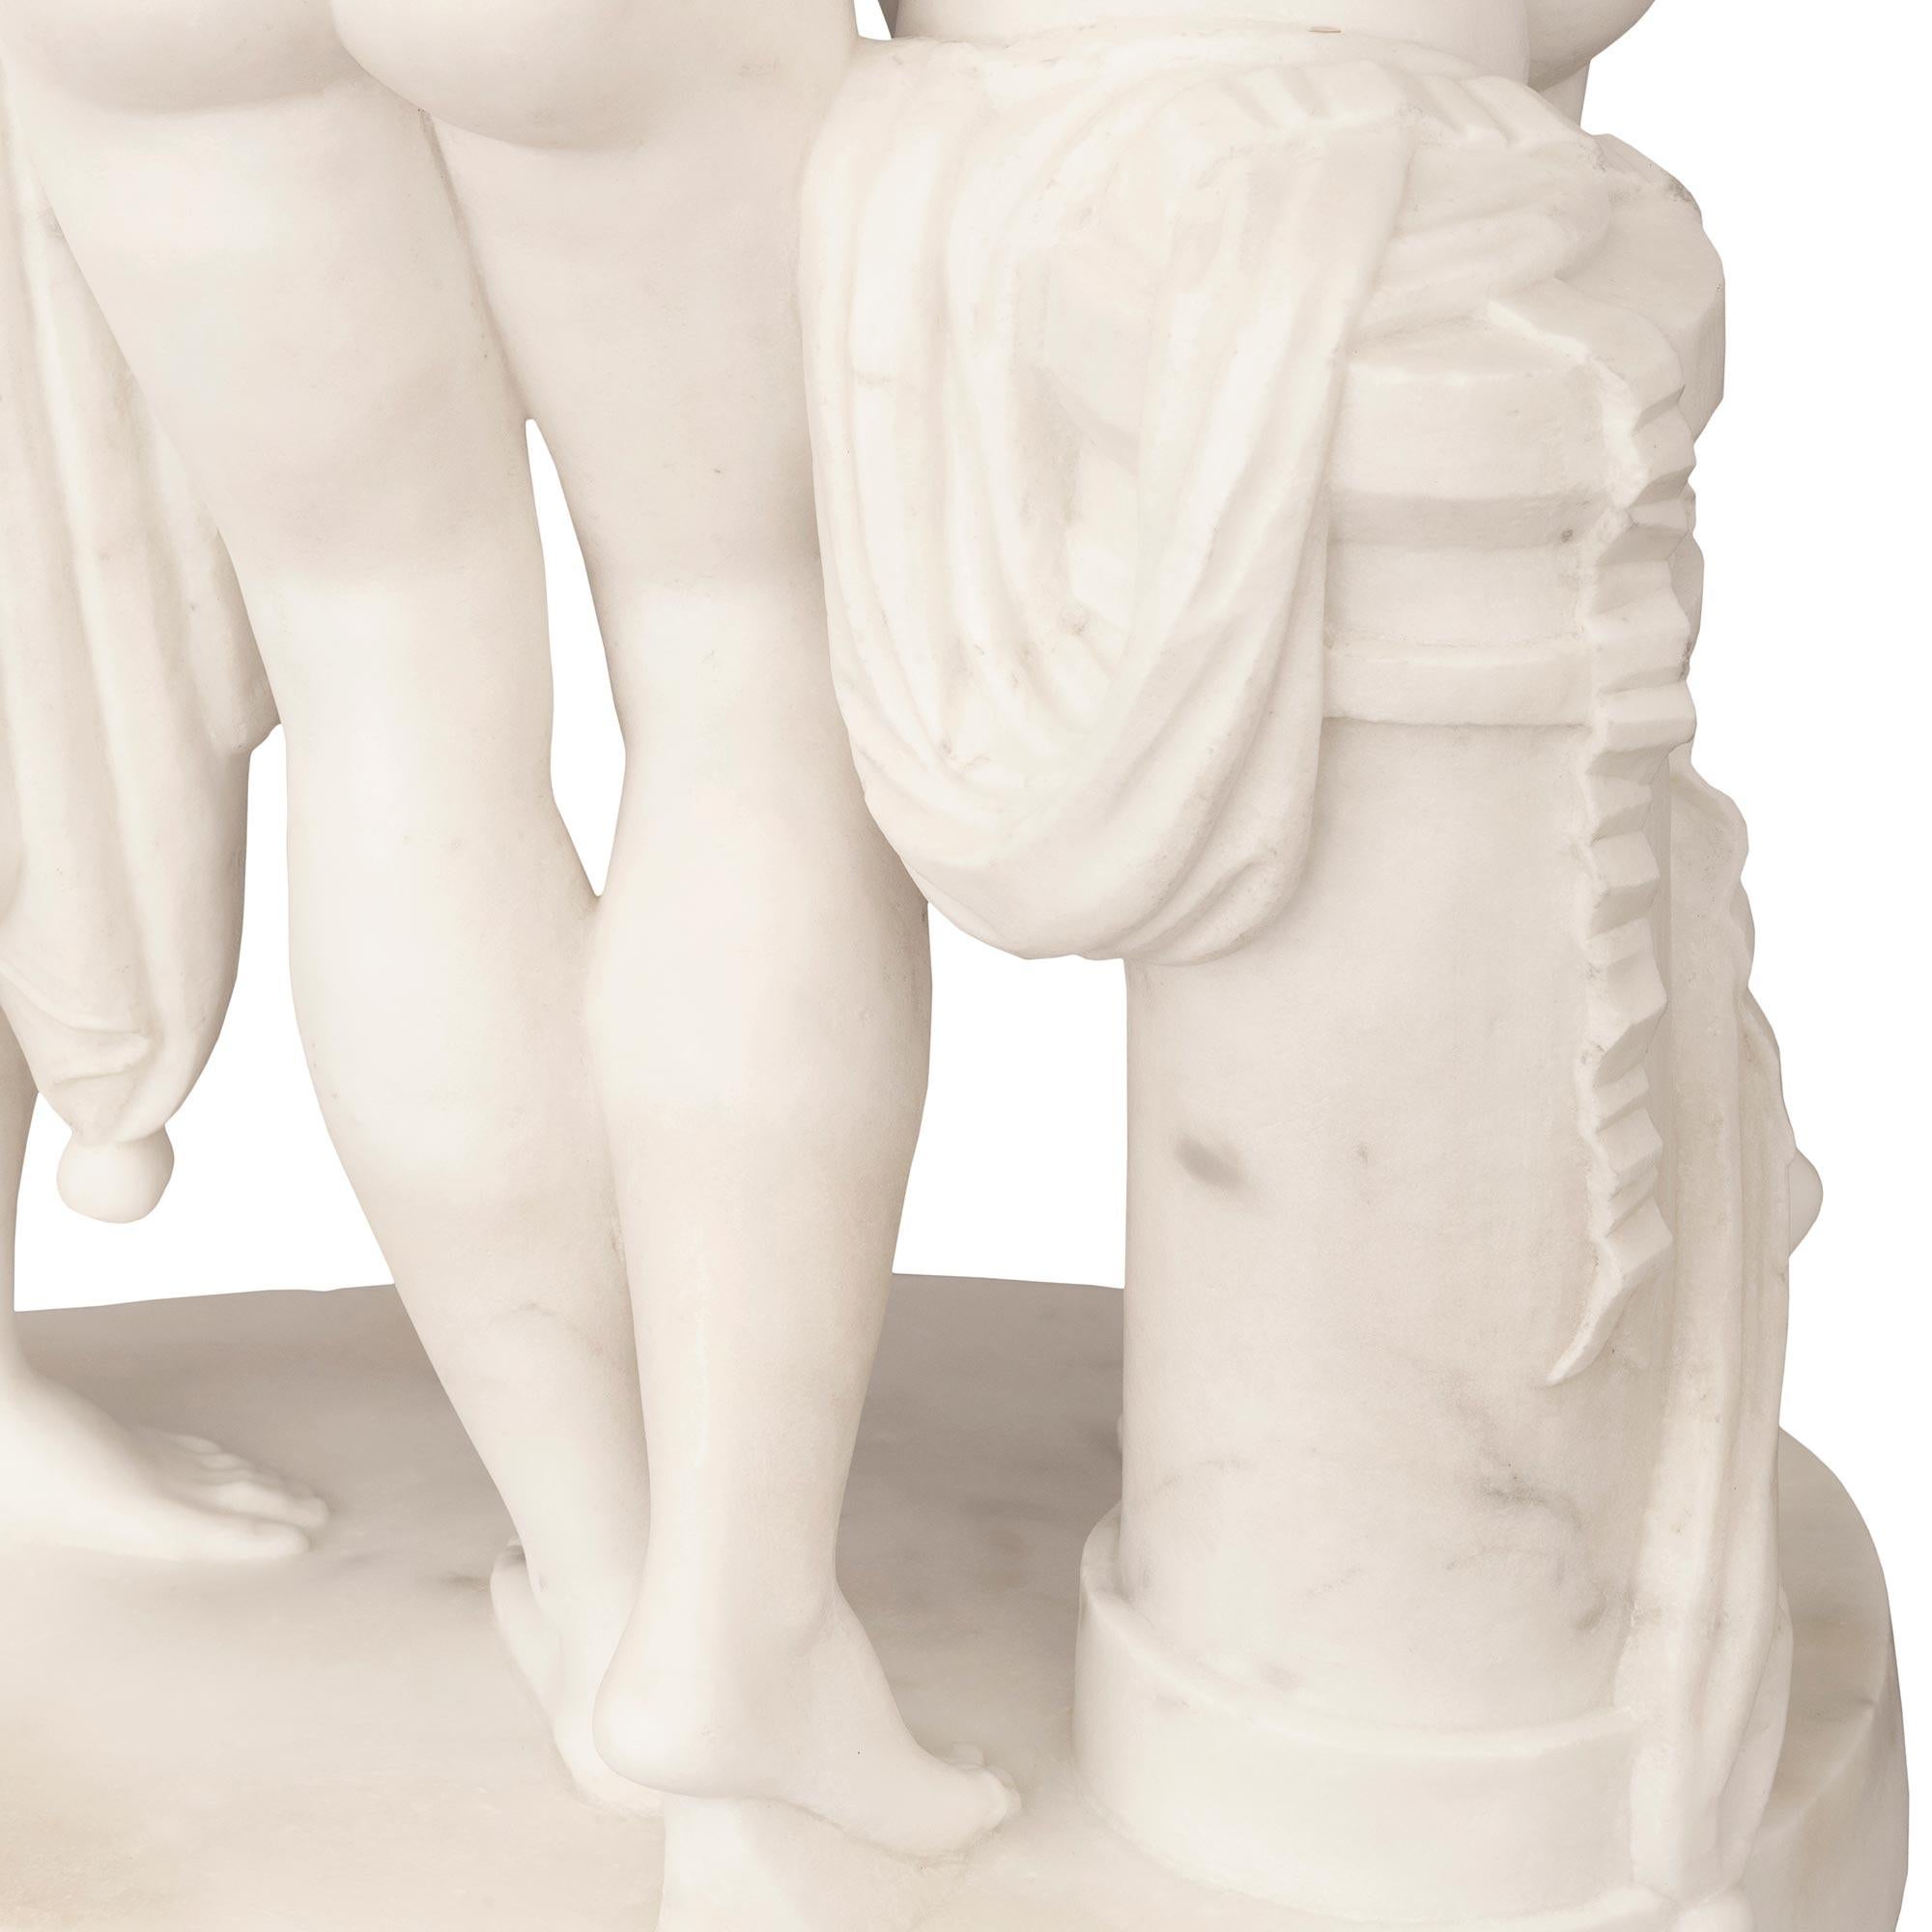 Italian 19th Century Marble Statue of the Three Graces For Sale 3